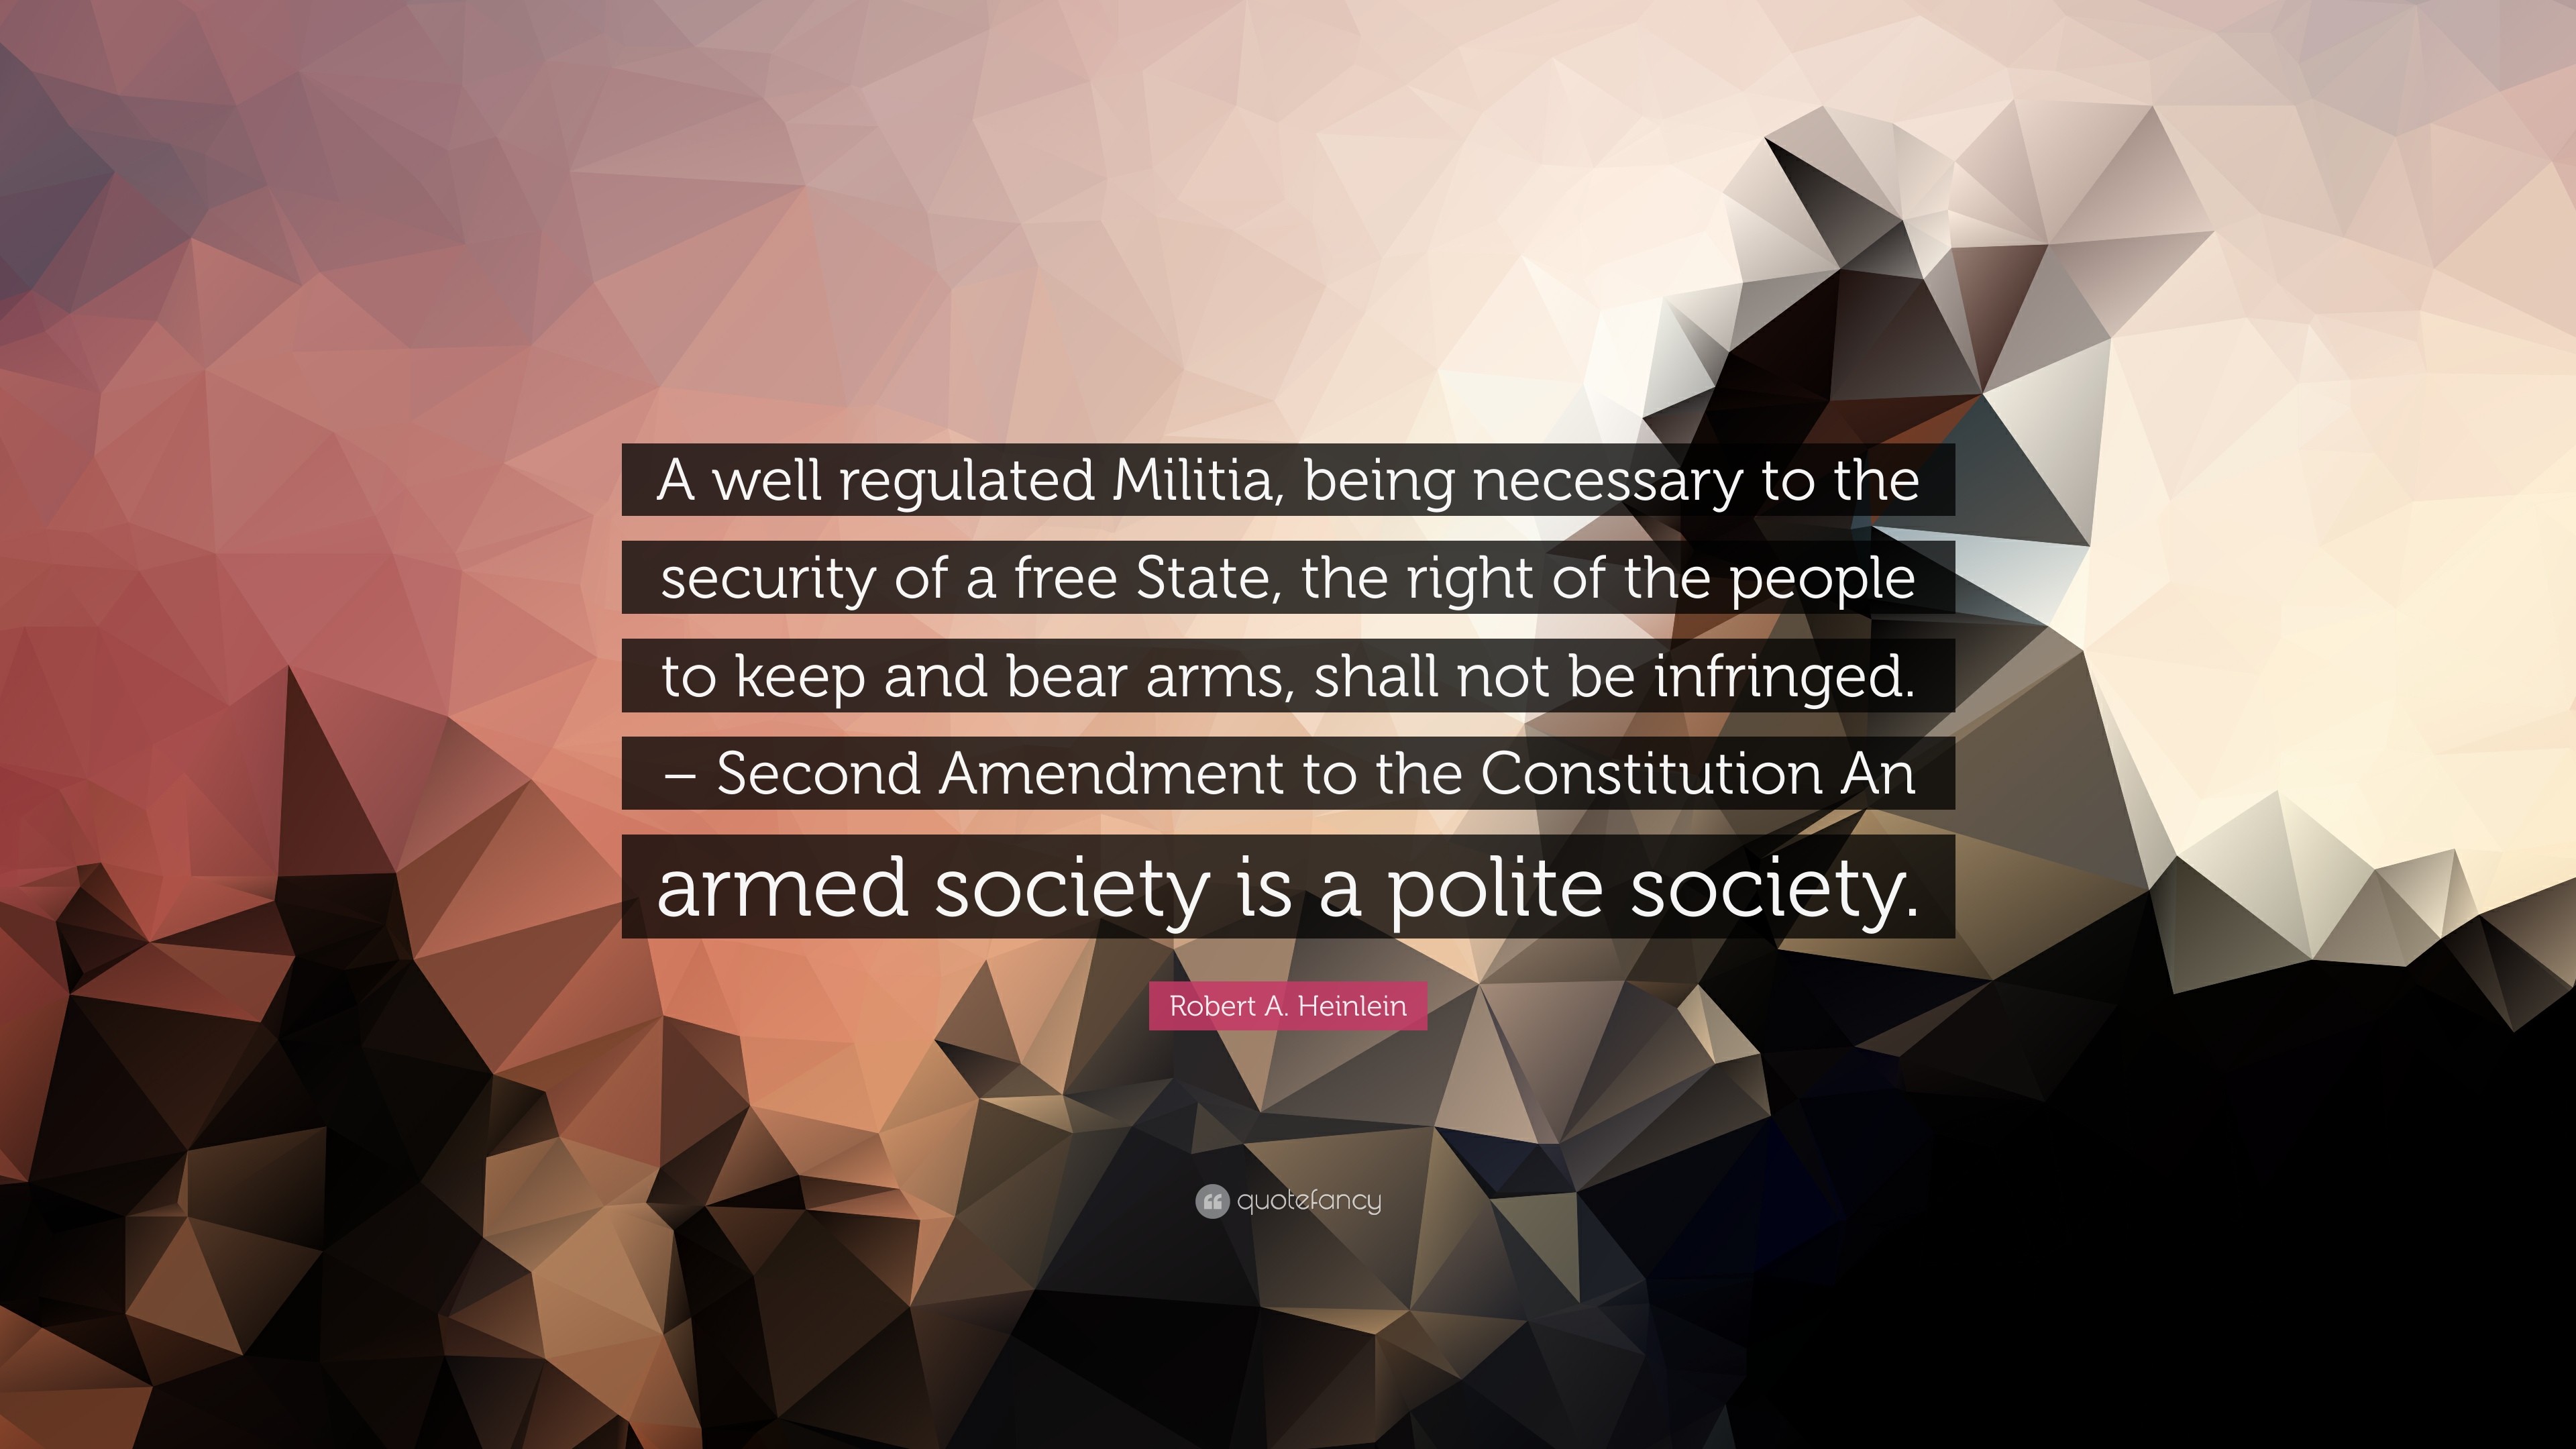 3840x2160 Robert A. Heinlein Quote: “A well regulated Militia, being necessary to the